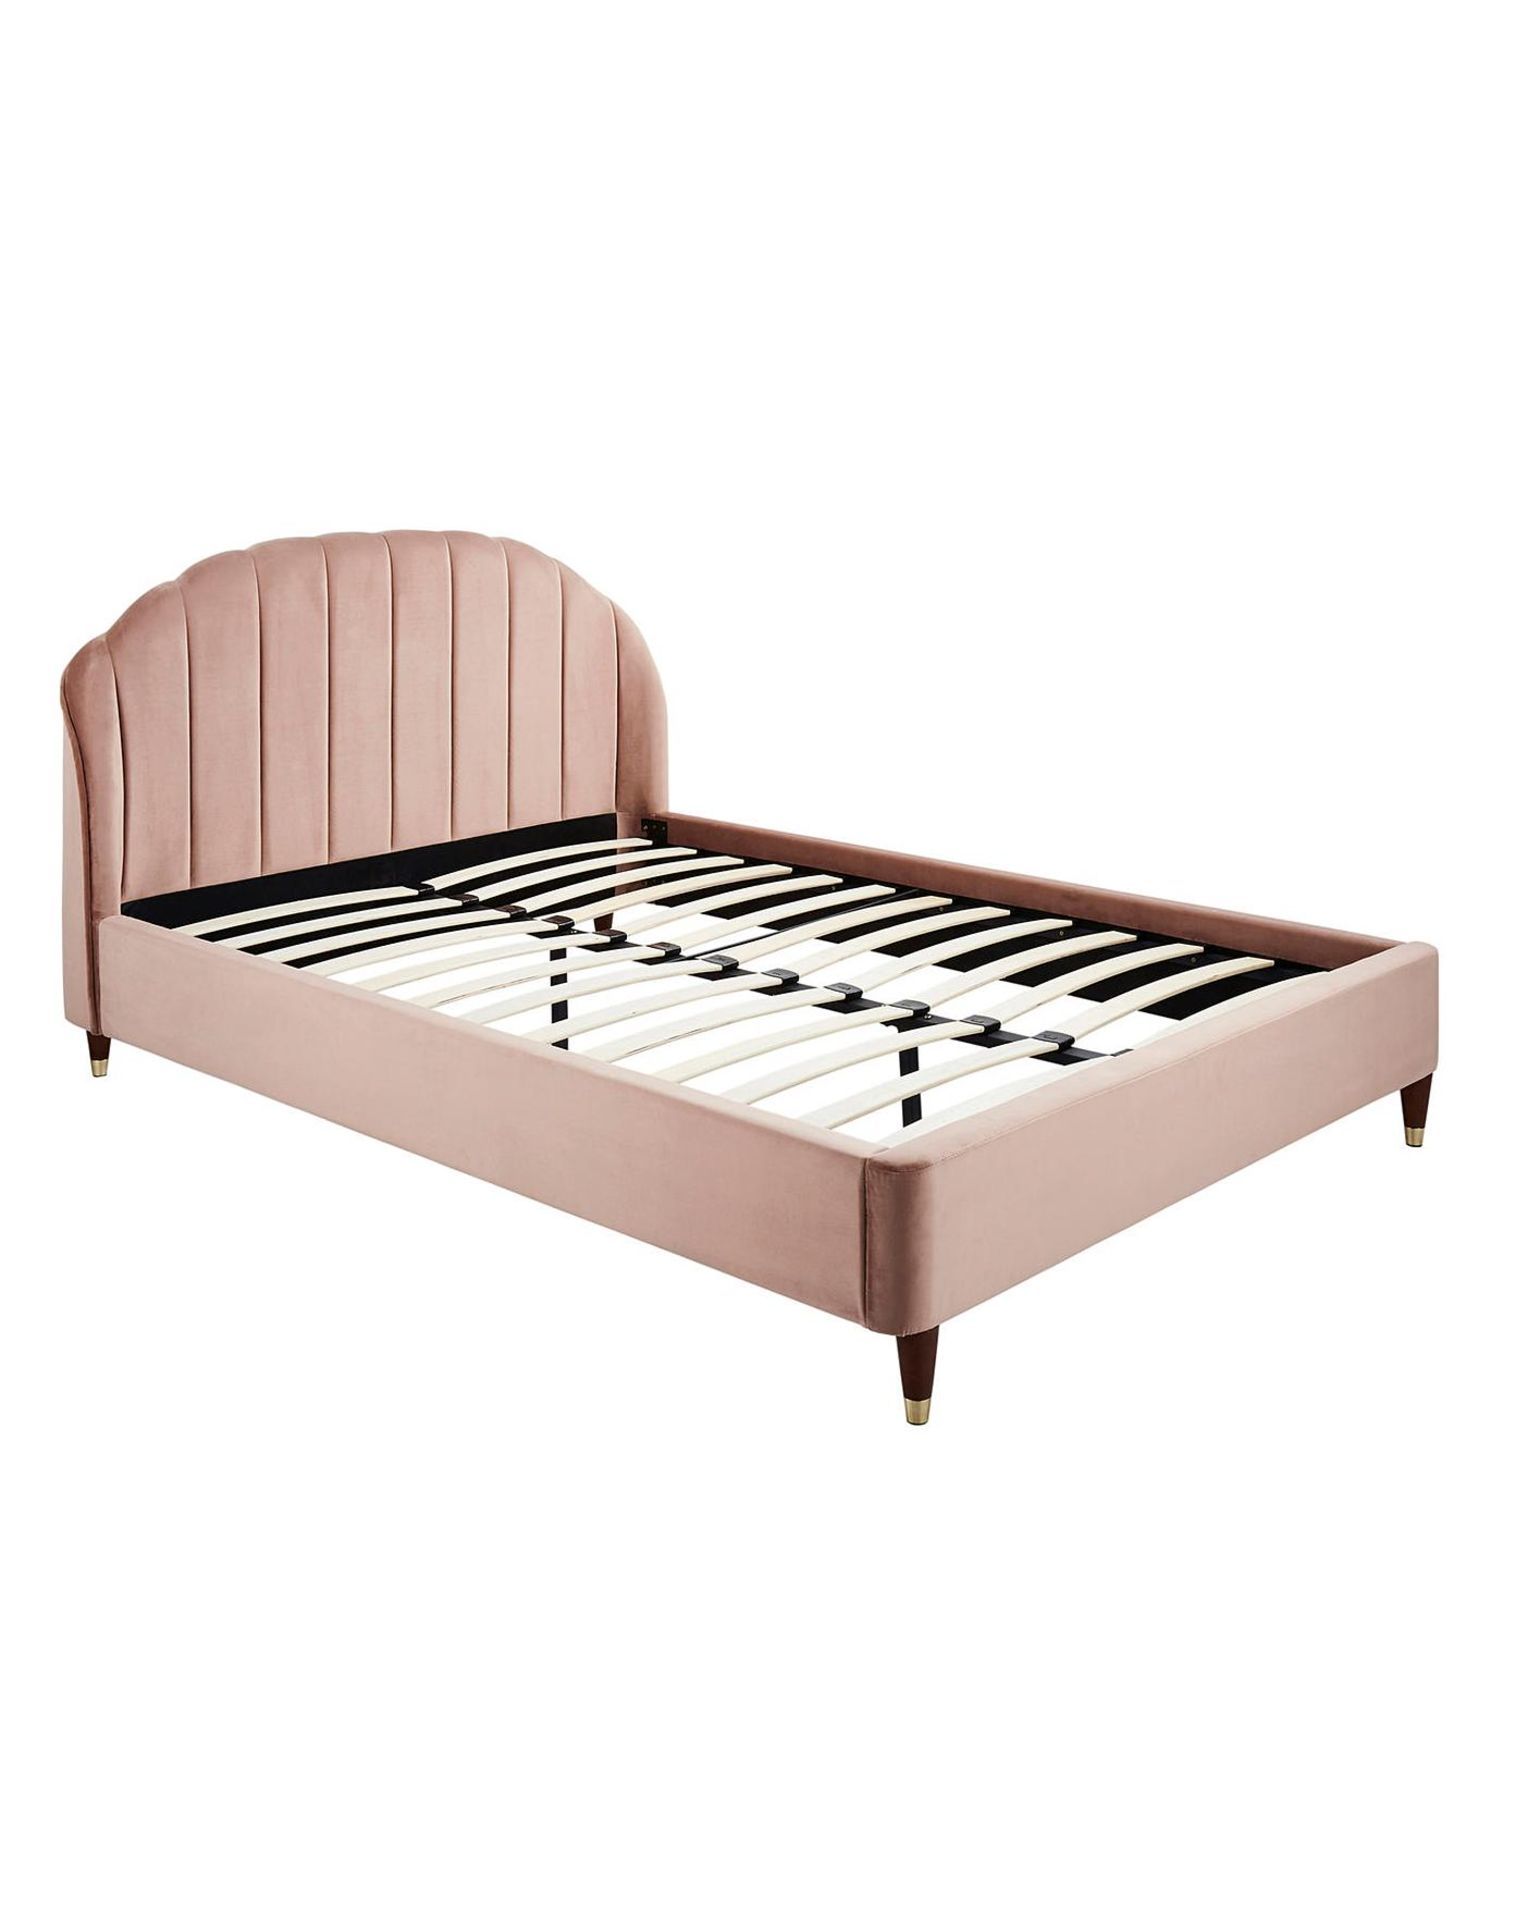 BRAND NEW ARDEN Quilted DOUBLE Bed Frame. BLUSH. RRP £339 EACH. The Arden Quilted Bed is the perfect - Image 2 of 2